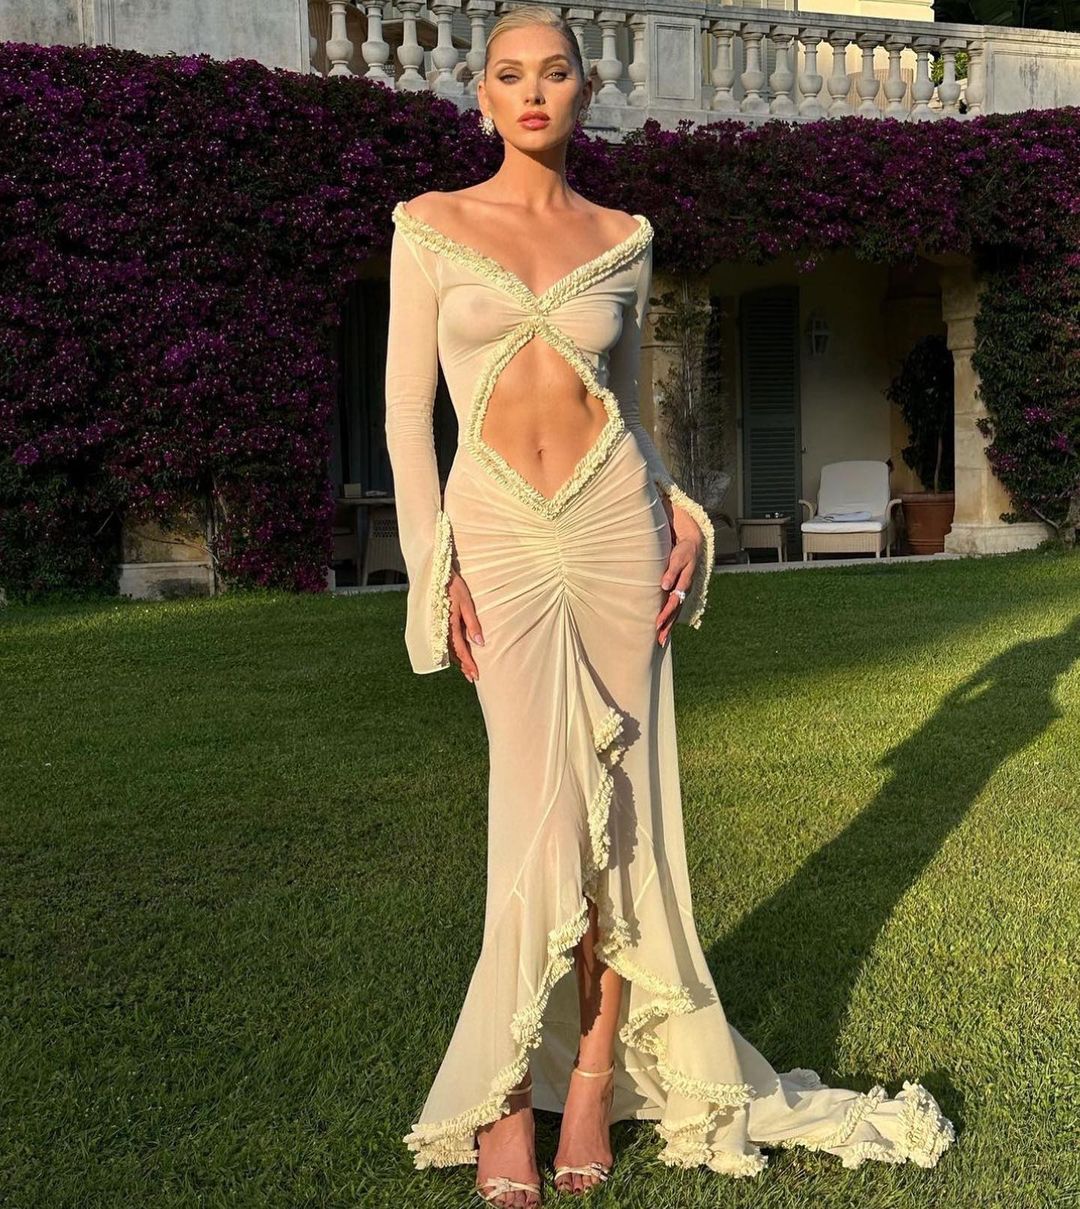 Elsa Hosk Stuns with Toned Abs and Fashionable Attire at Amfar Cannes Gala 2023 Photoshoot